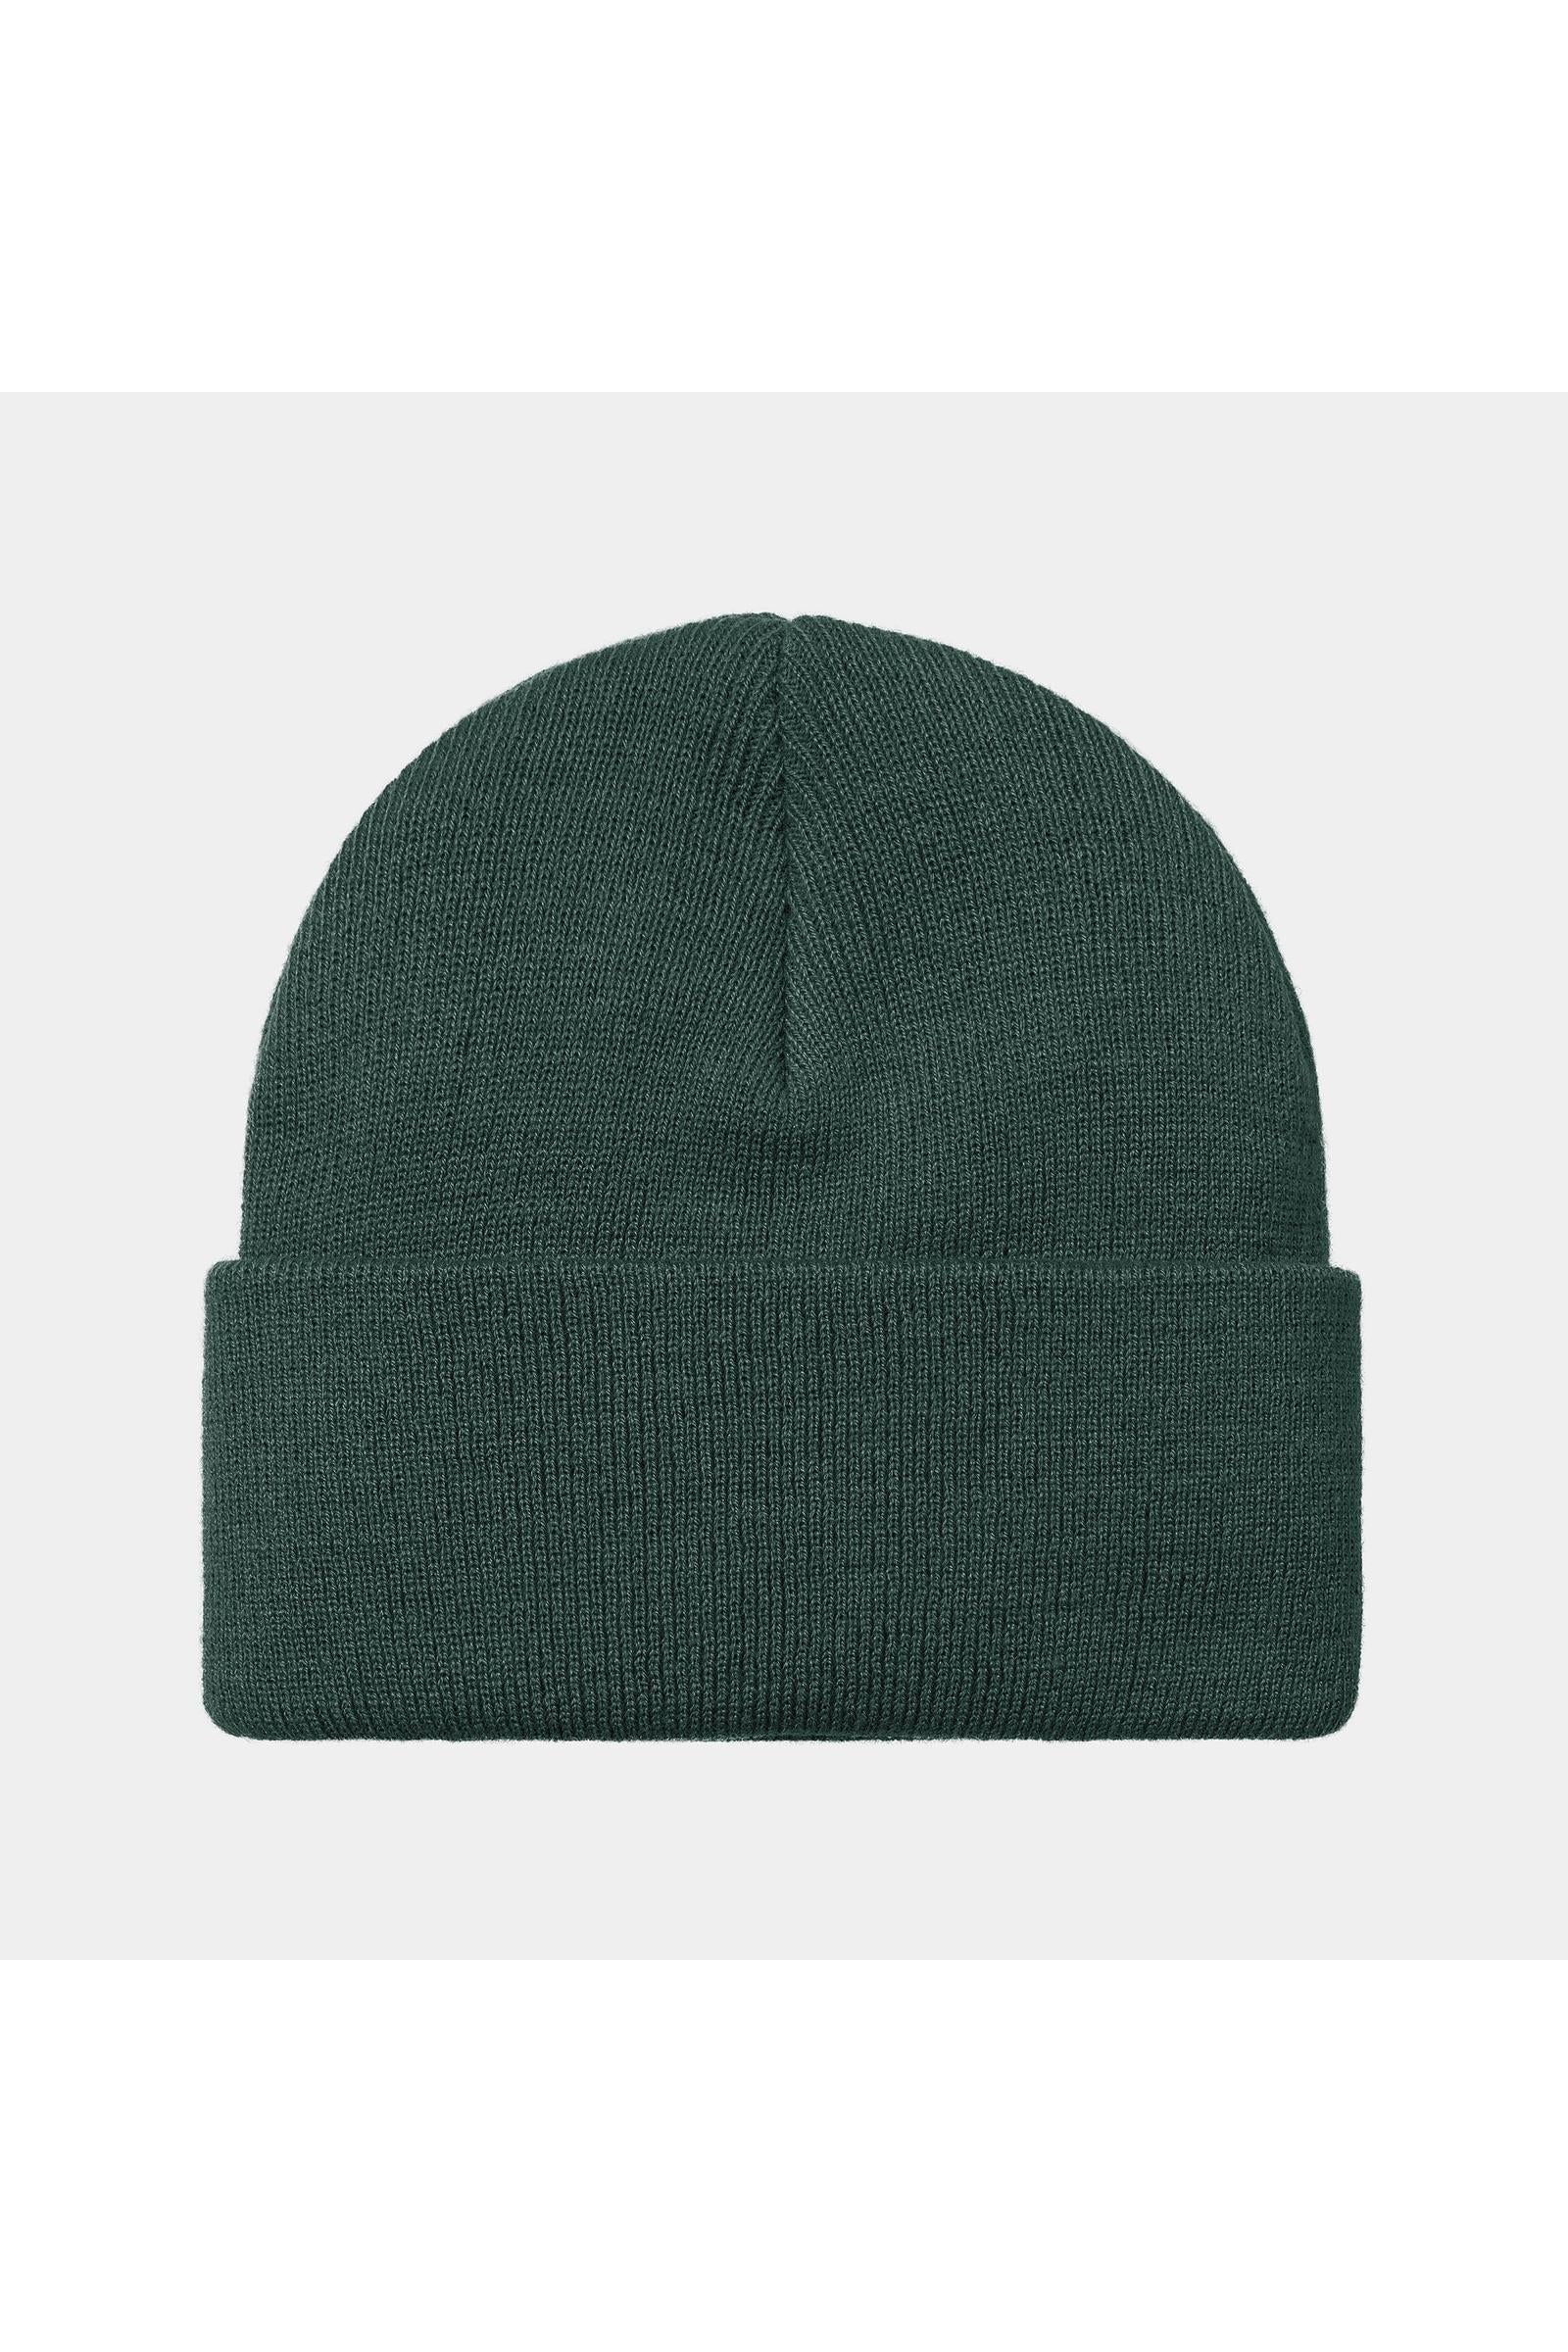 Chase Beanie-Discovery Green / Gold-Back View